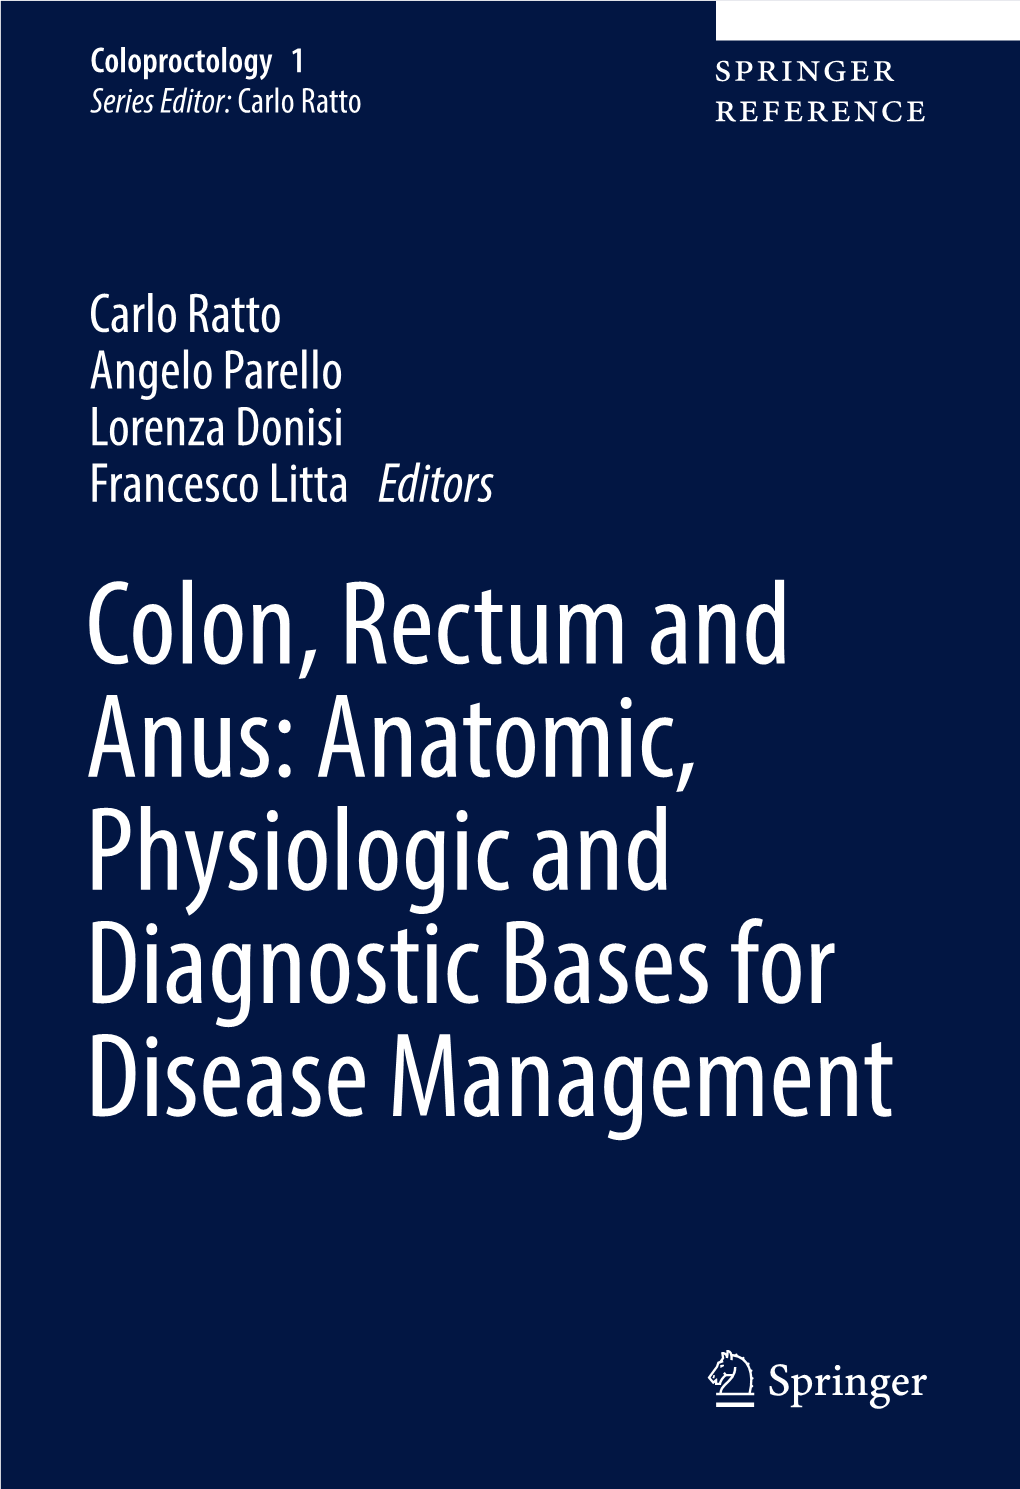 Colon, Rectum and Anus: Anatomic, Physiologic and Diagnostic Bases for Disease Management Coloproctology